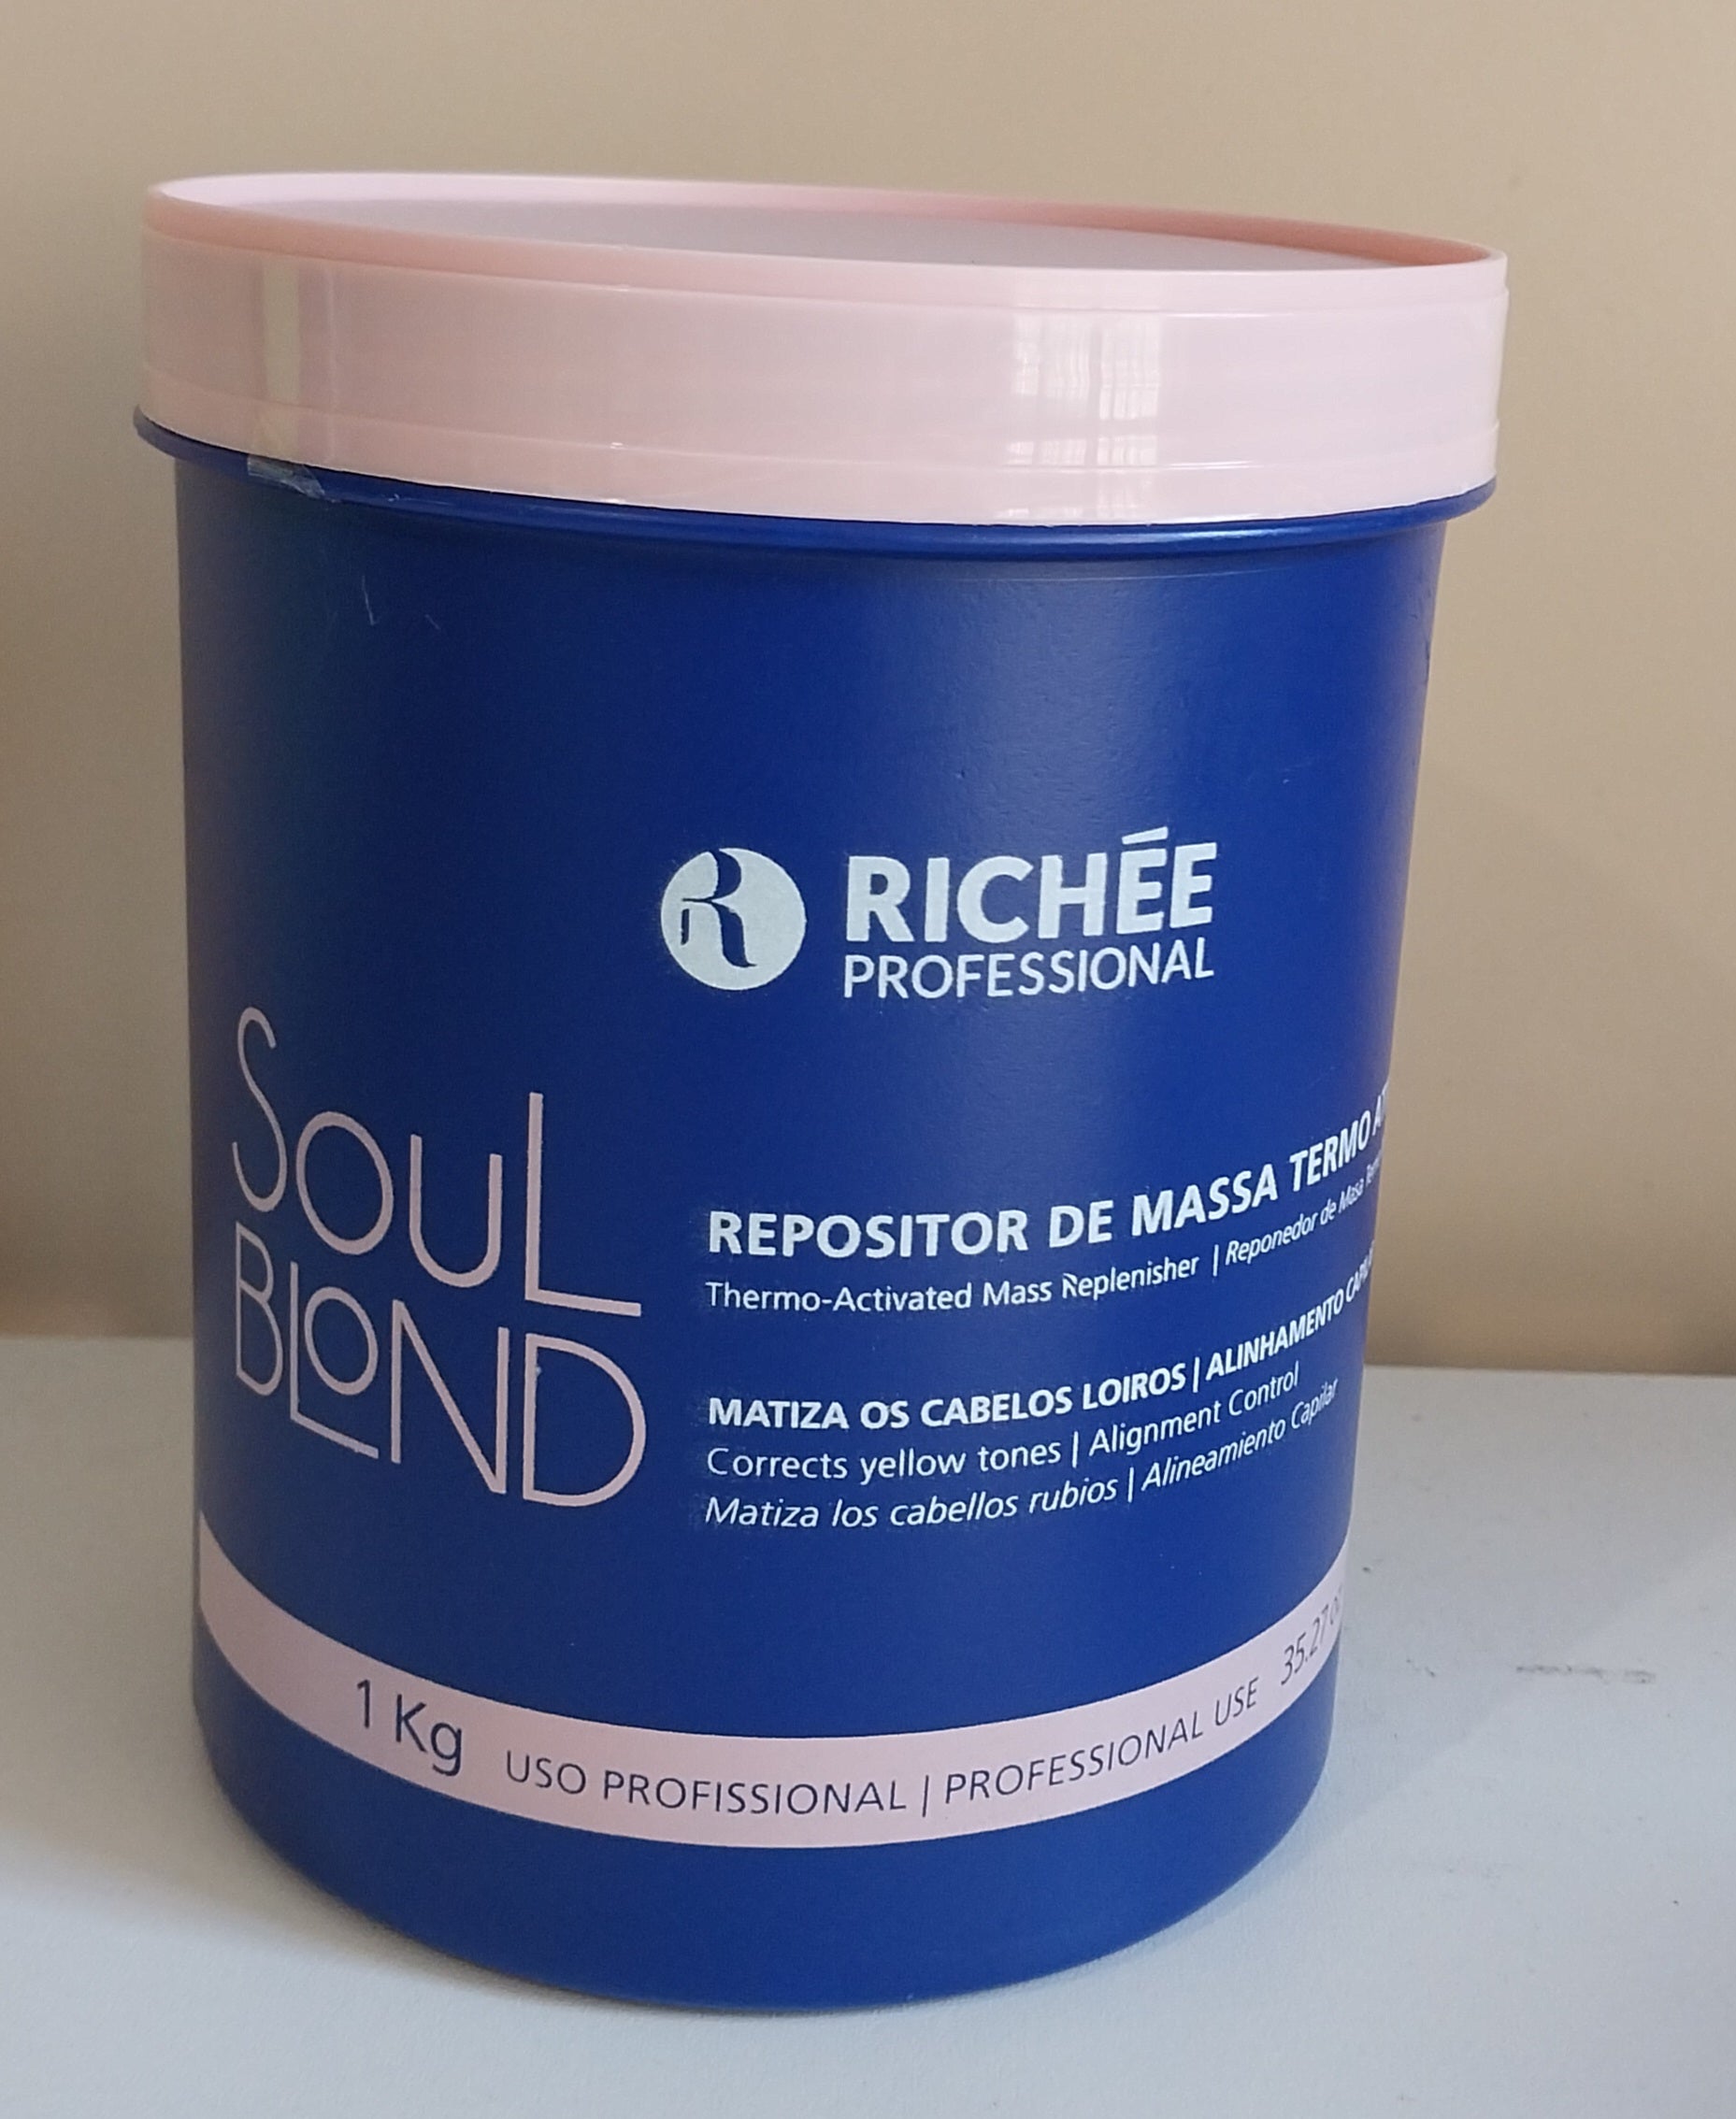 Richée Hair Color Thermo Activated Mass Replenisher Soul Blond Hair Treatment Mask 1Kg - Richée